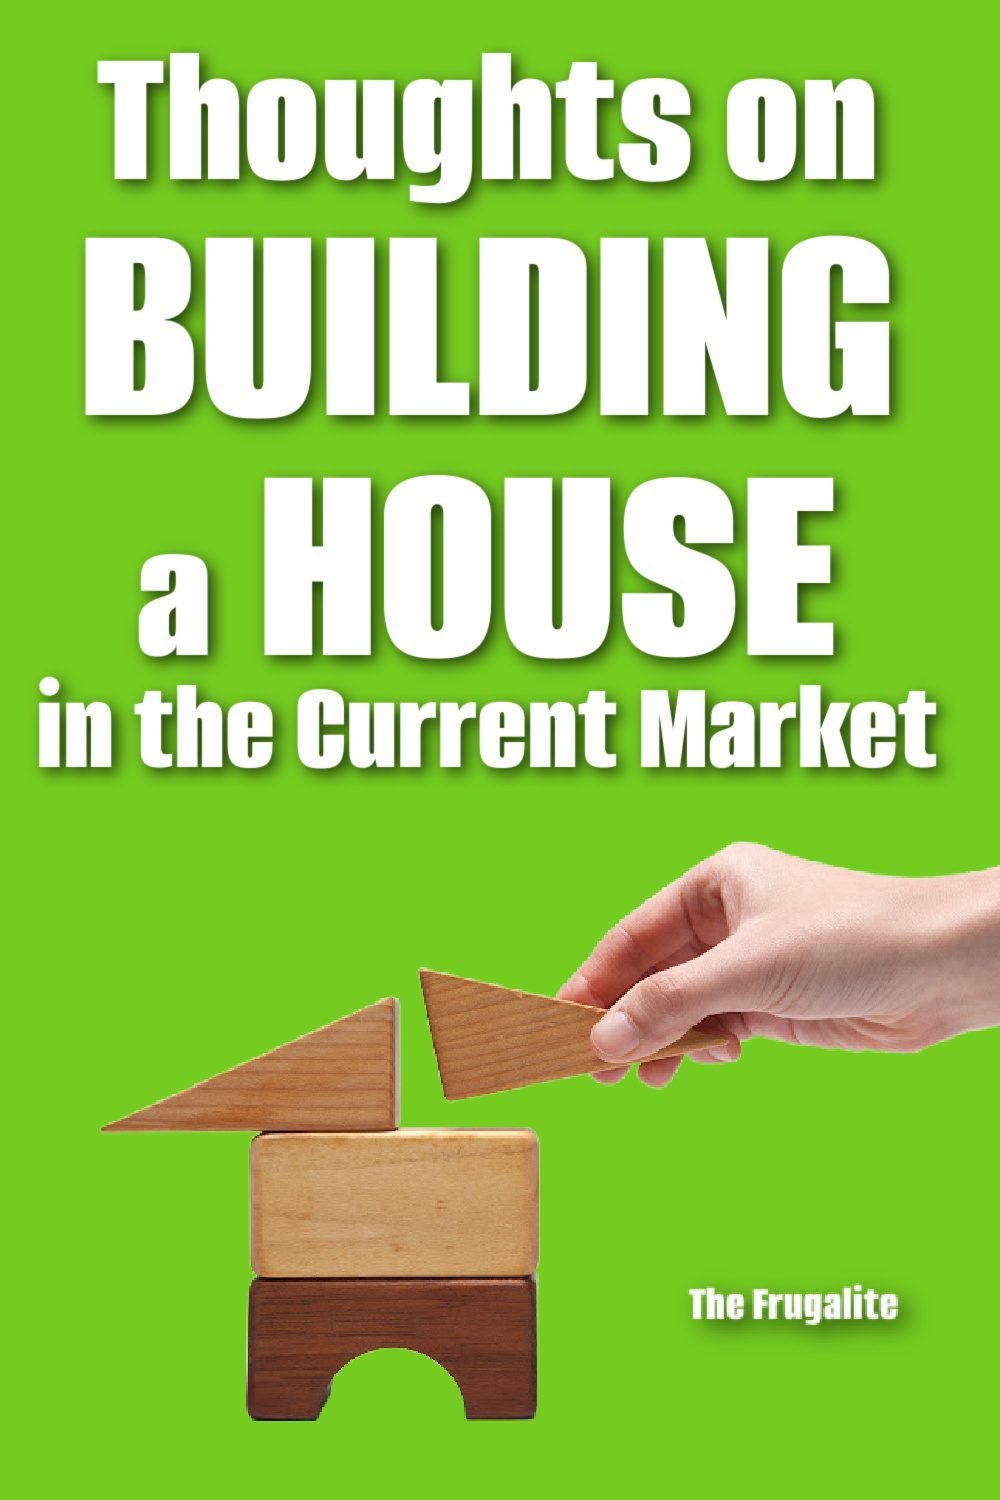 Thoughts on Building a House in the Current Market